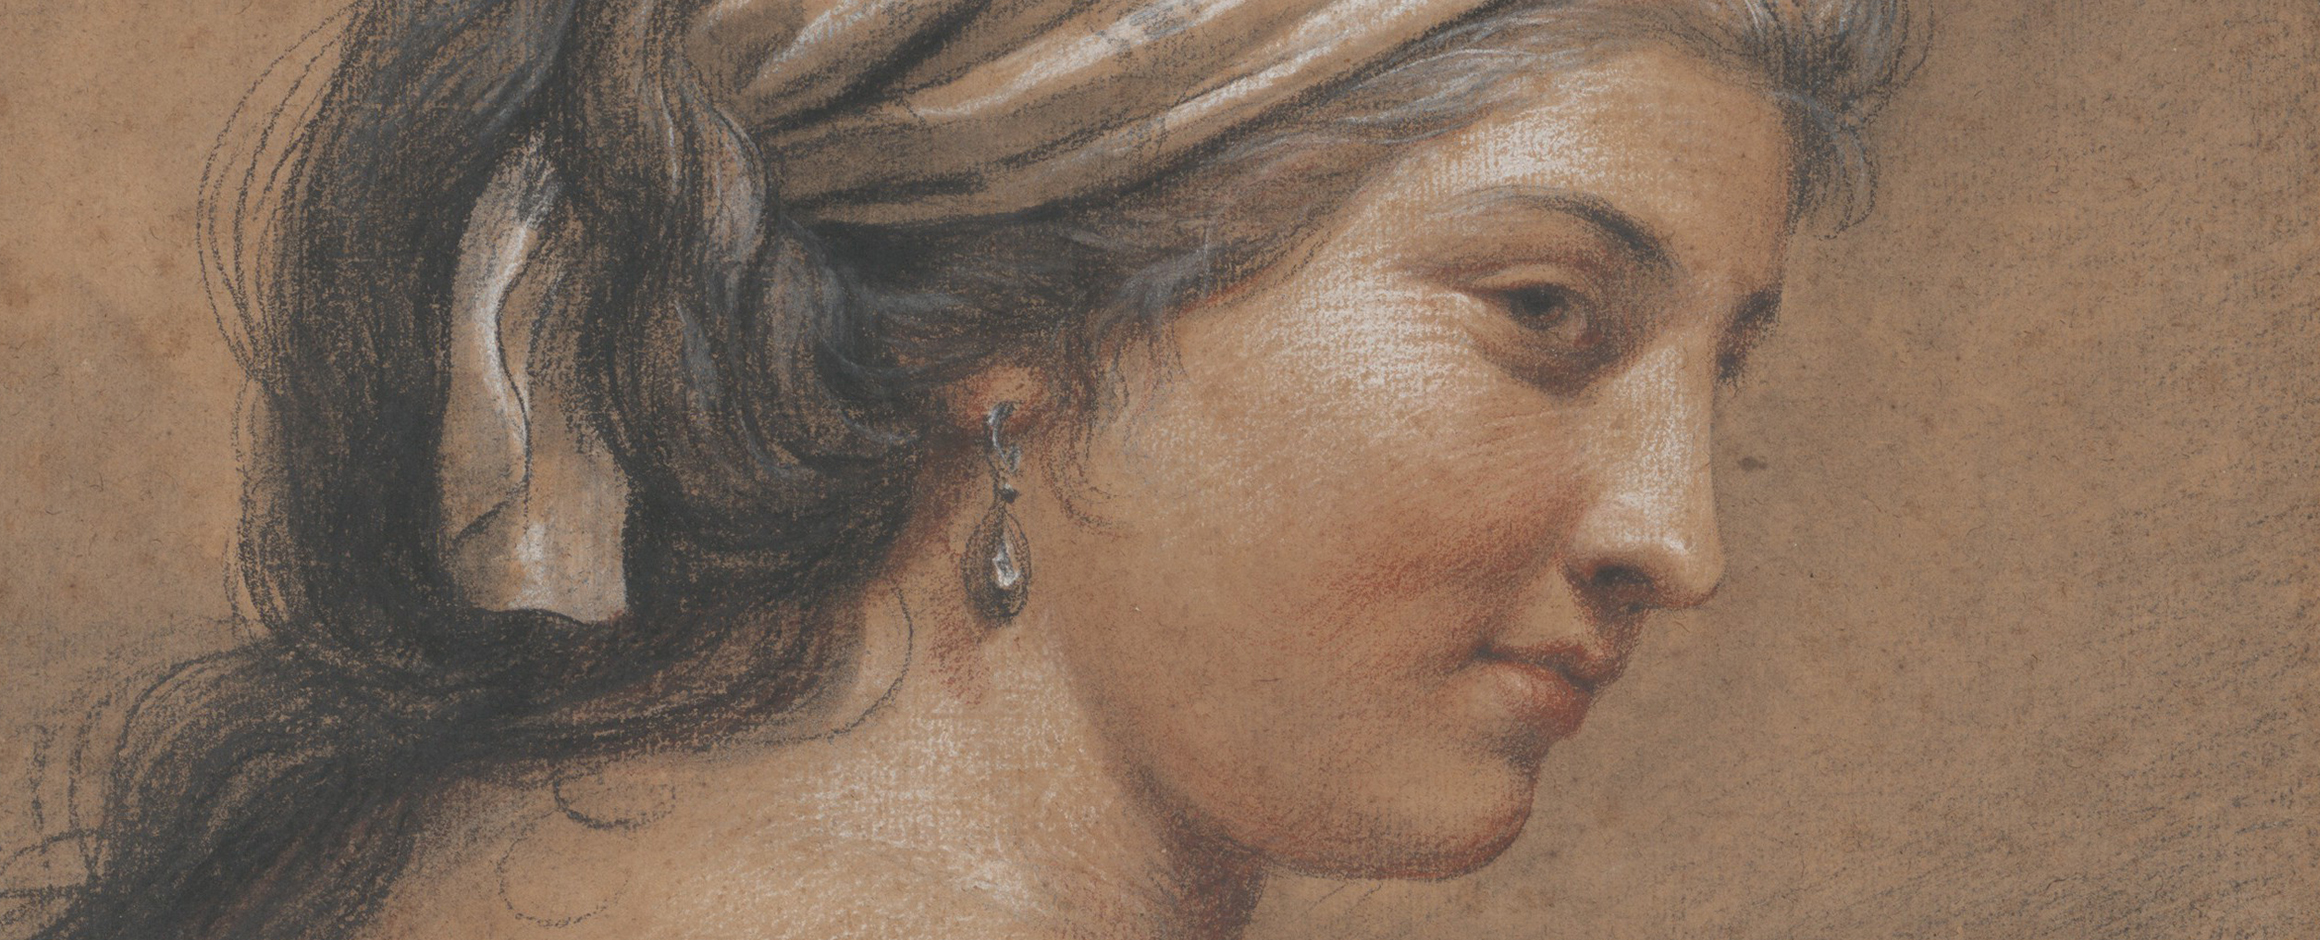 A close-up detail of a woman's head in profile, drawn in reddish chalk.